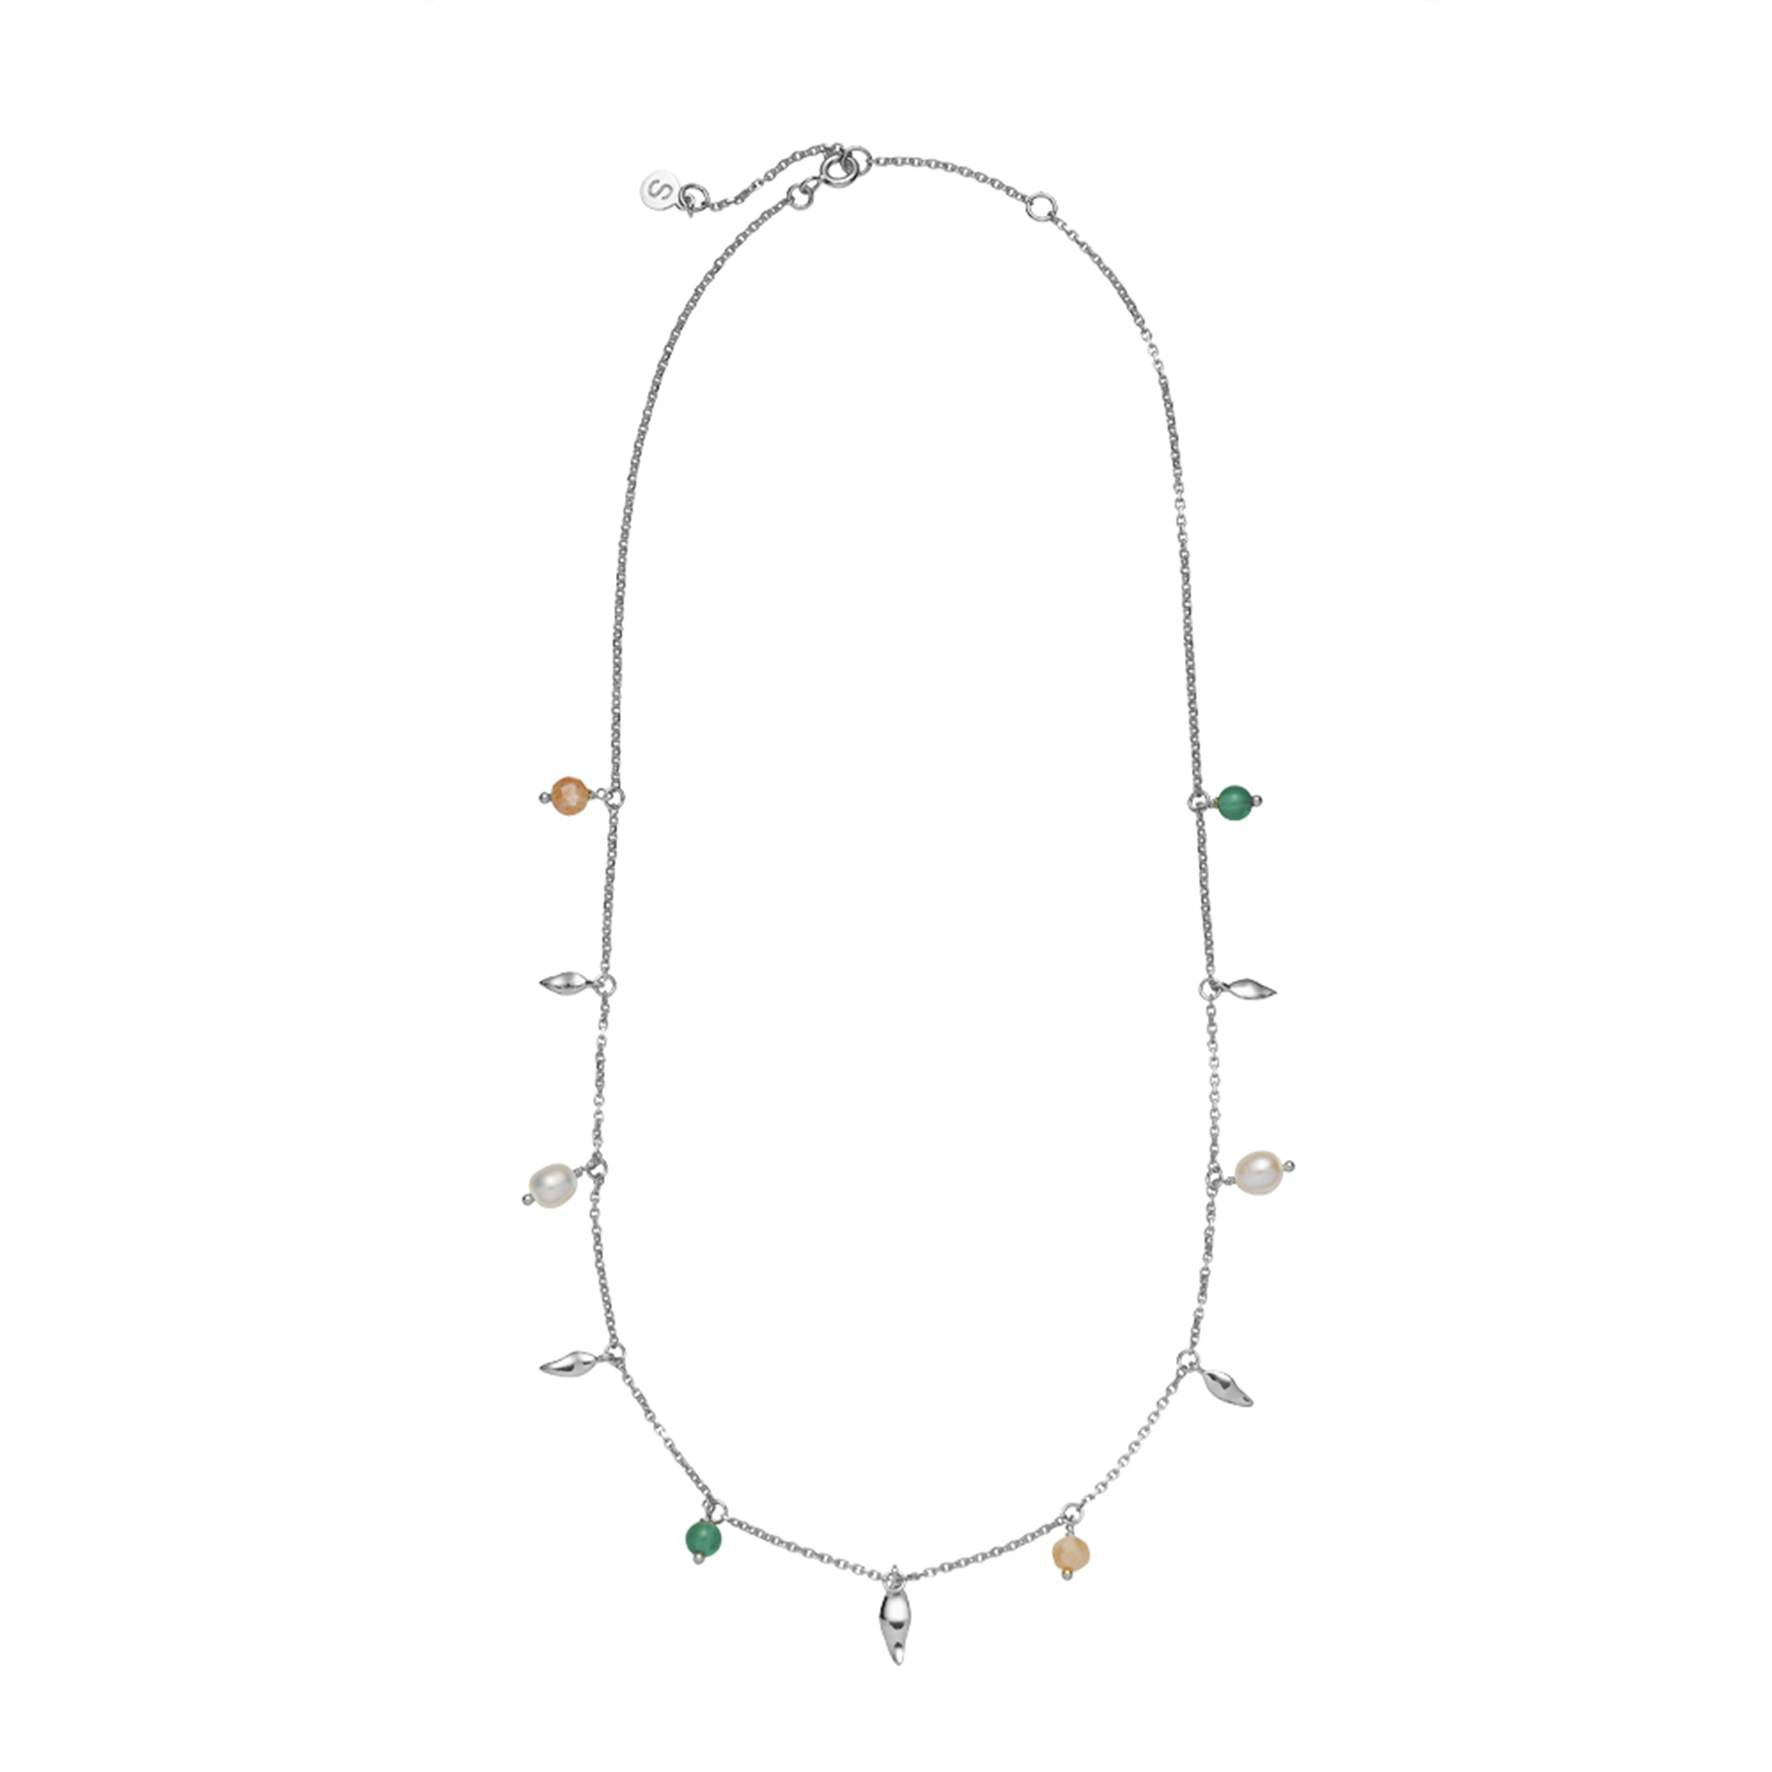 Mia by Sistie Necklace from Sistie in Silver Sterling 925